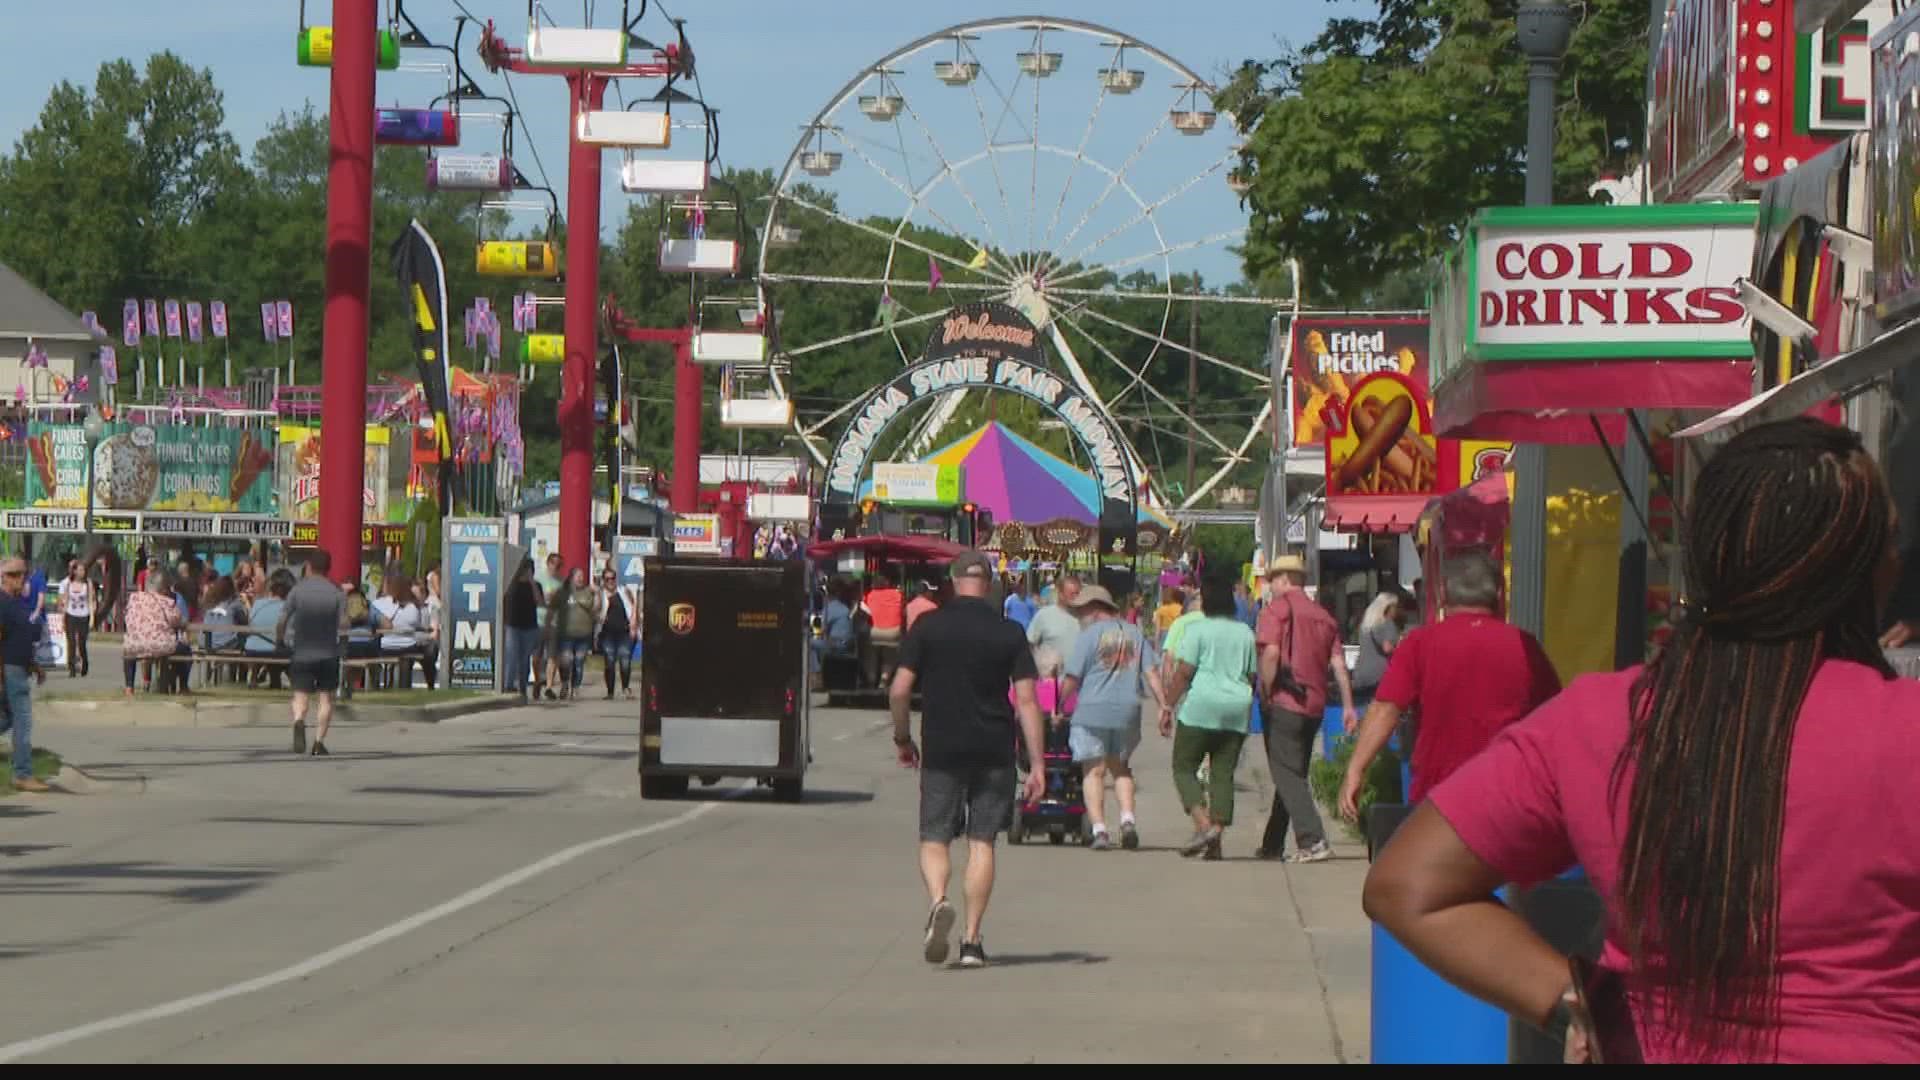 The weather was near-perfect for the Fair's first day.